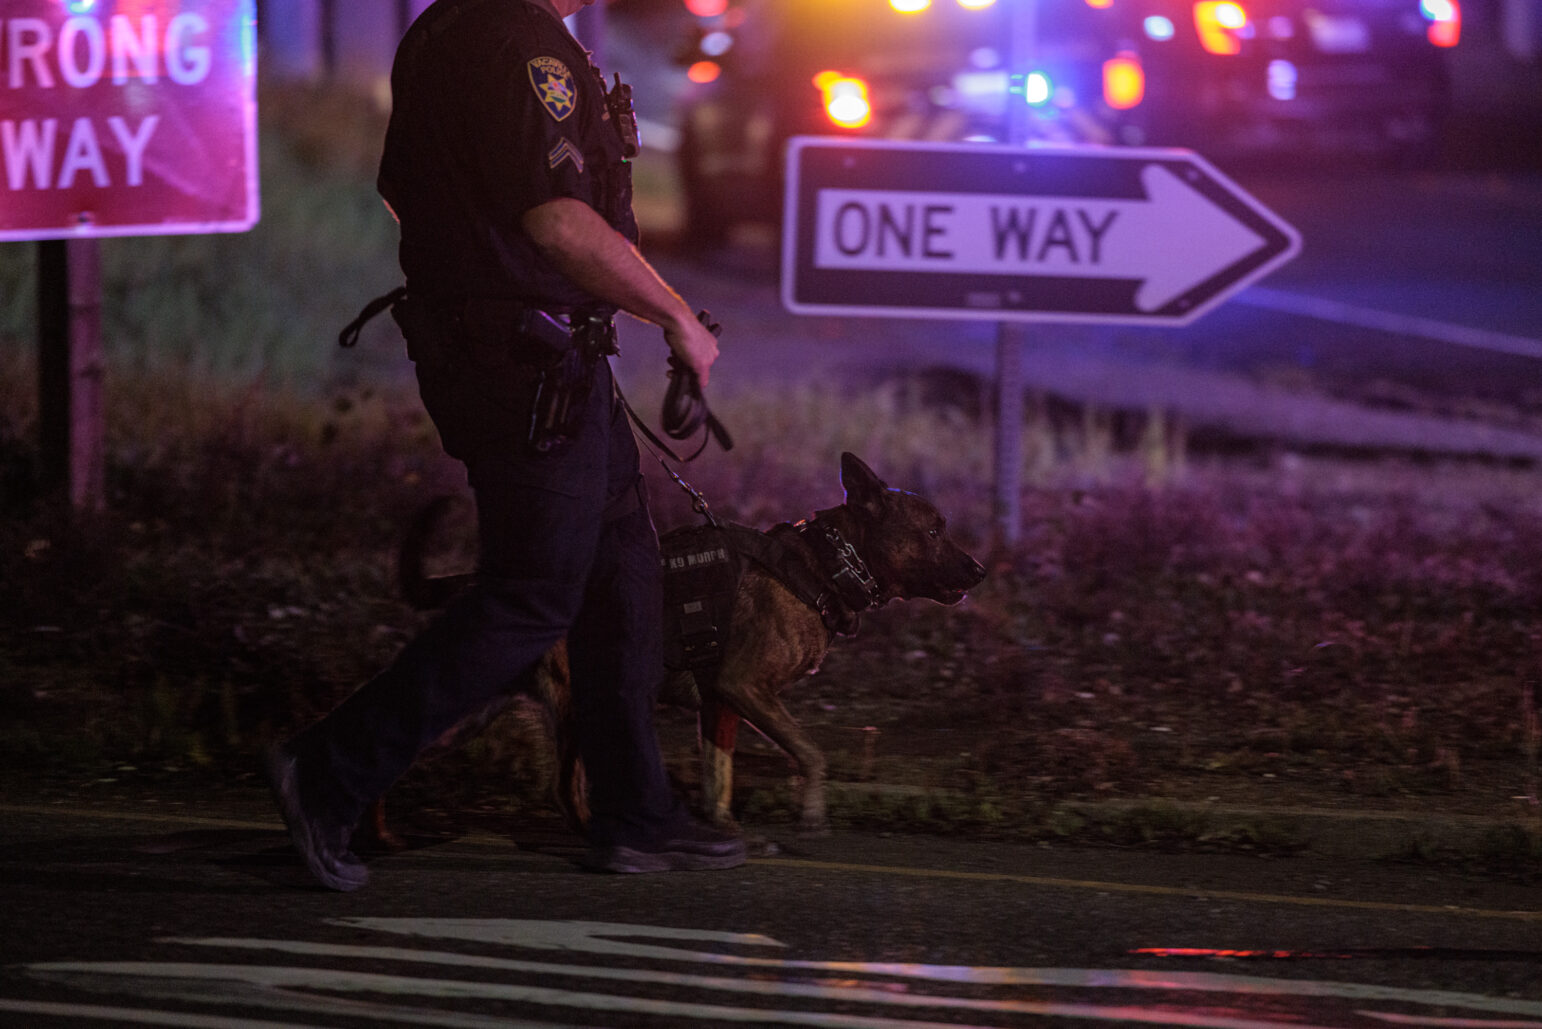 A police corporal at night, walking to the right of the frame with a focused police dog on a leash. Both are in front of a "ONE WAY" road sign, with the illuminated, colorful lights of police cars in the background.